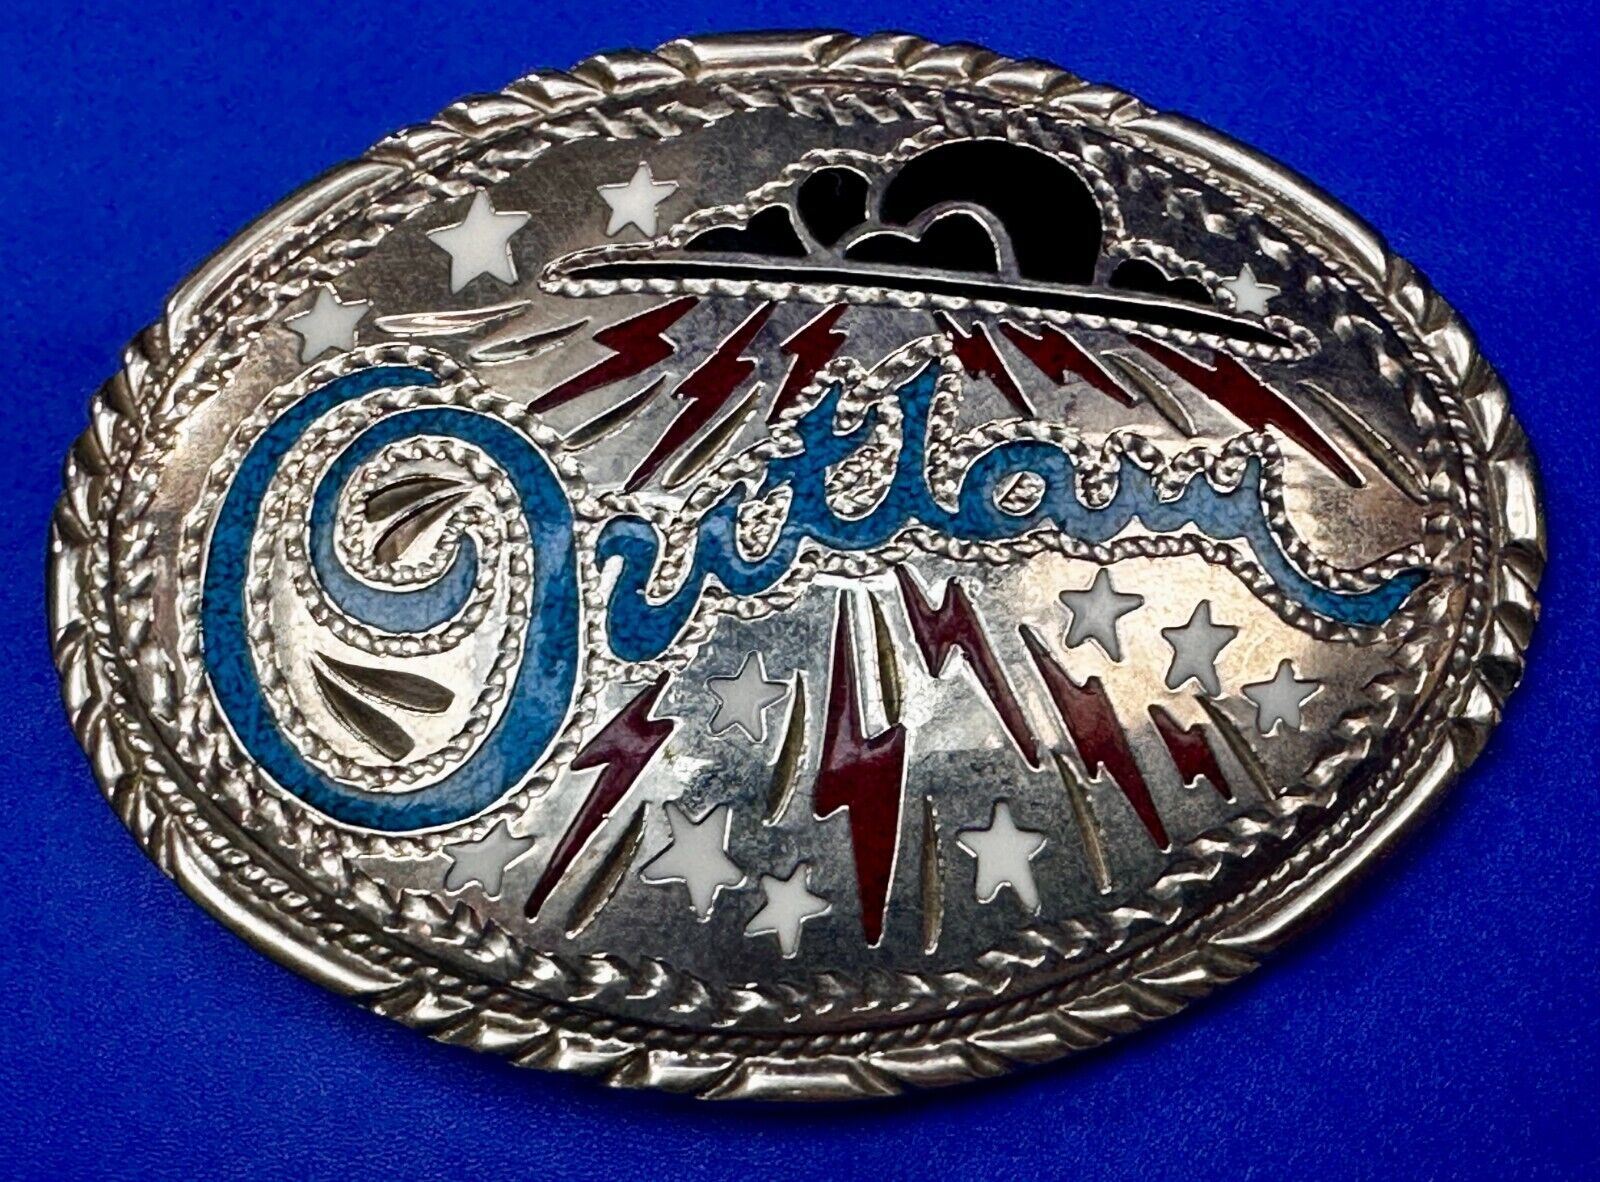 OUTLAW Vintage Turquoise coral Colored Enamel Inlay Belt Buckle by SSI